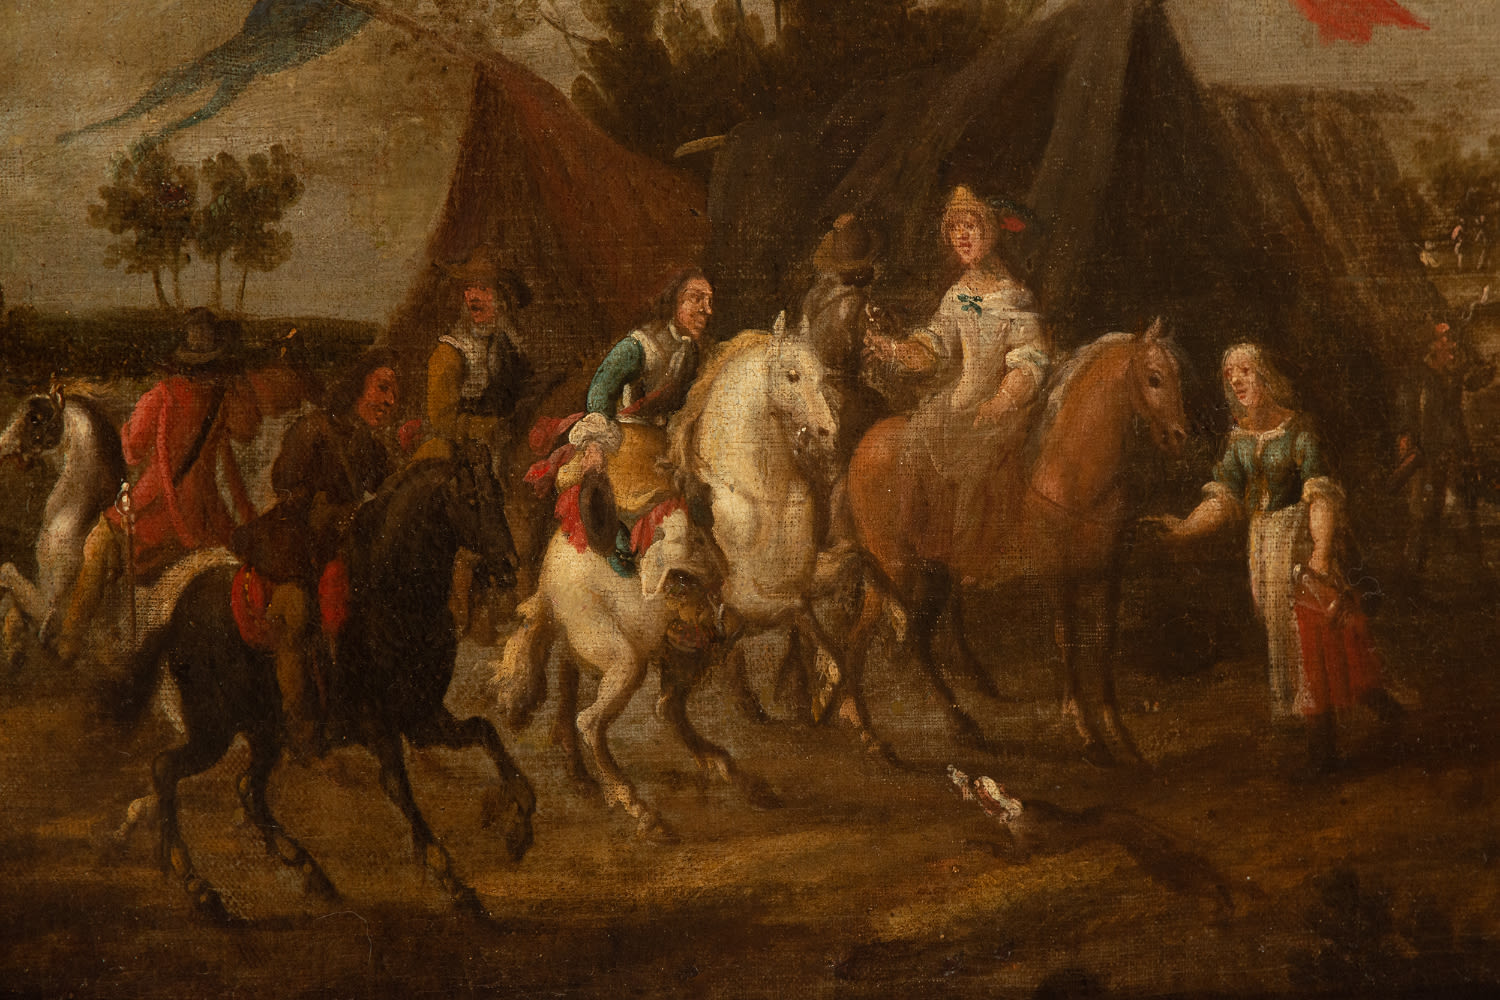 Cavalry scene, Dutch school from the second half of the 17th century - Image 5 of 12